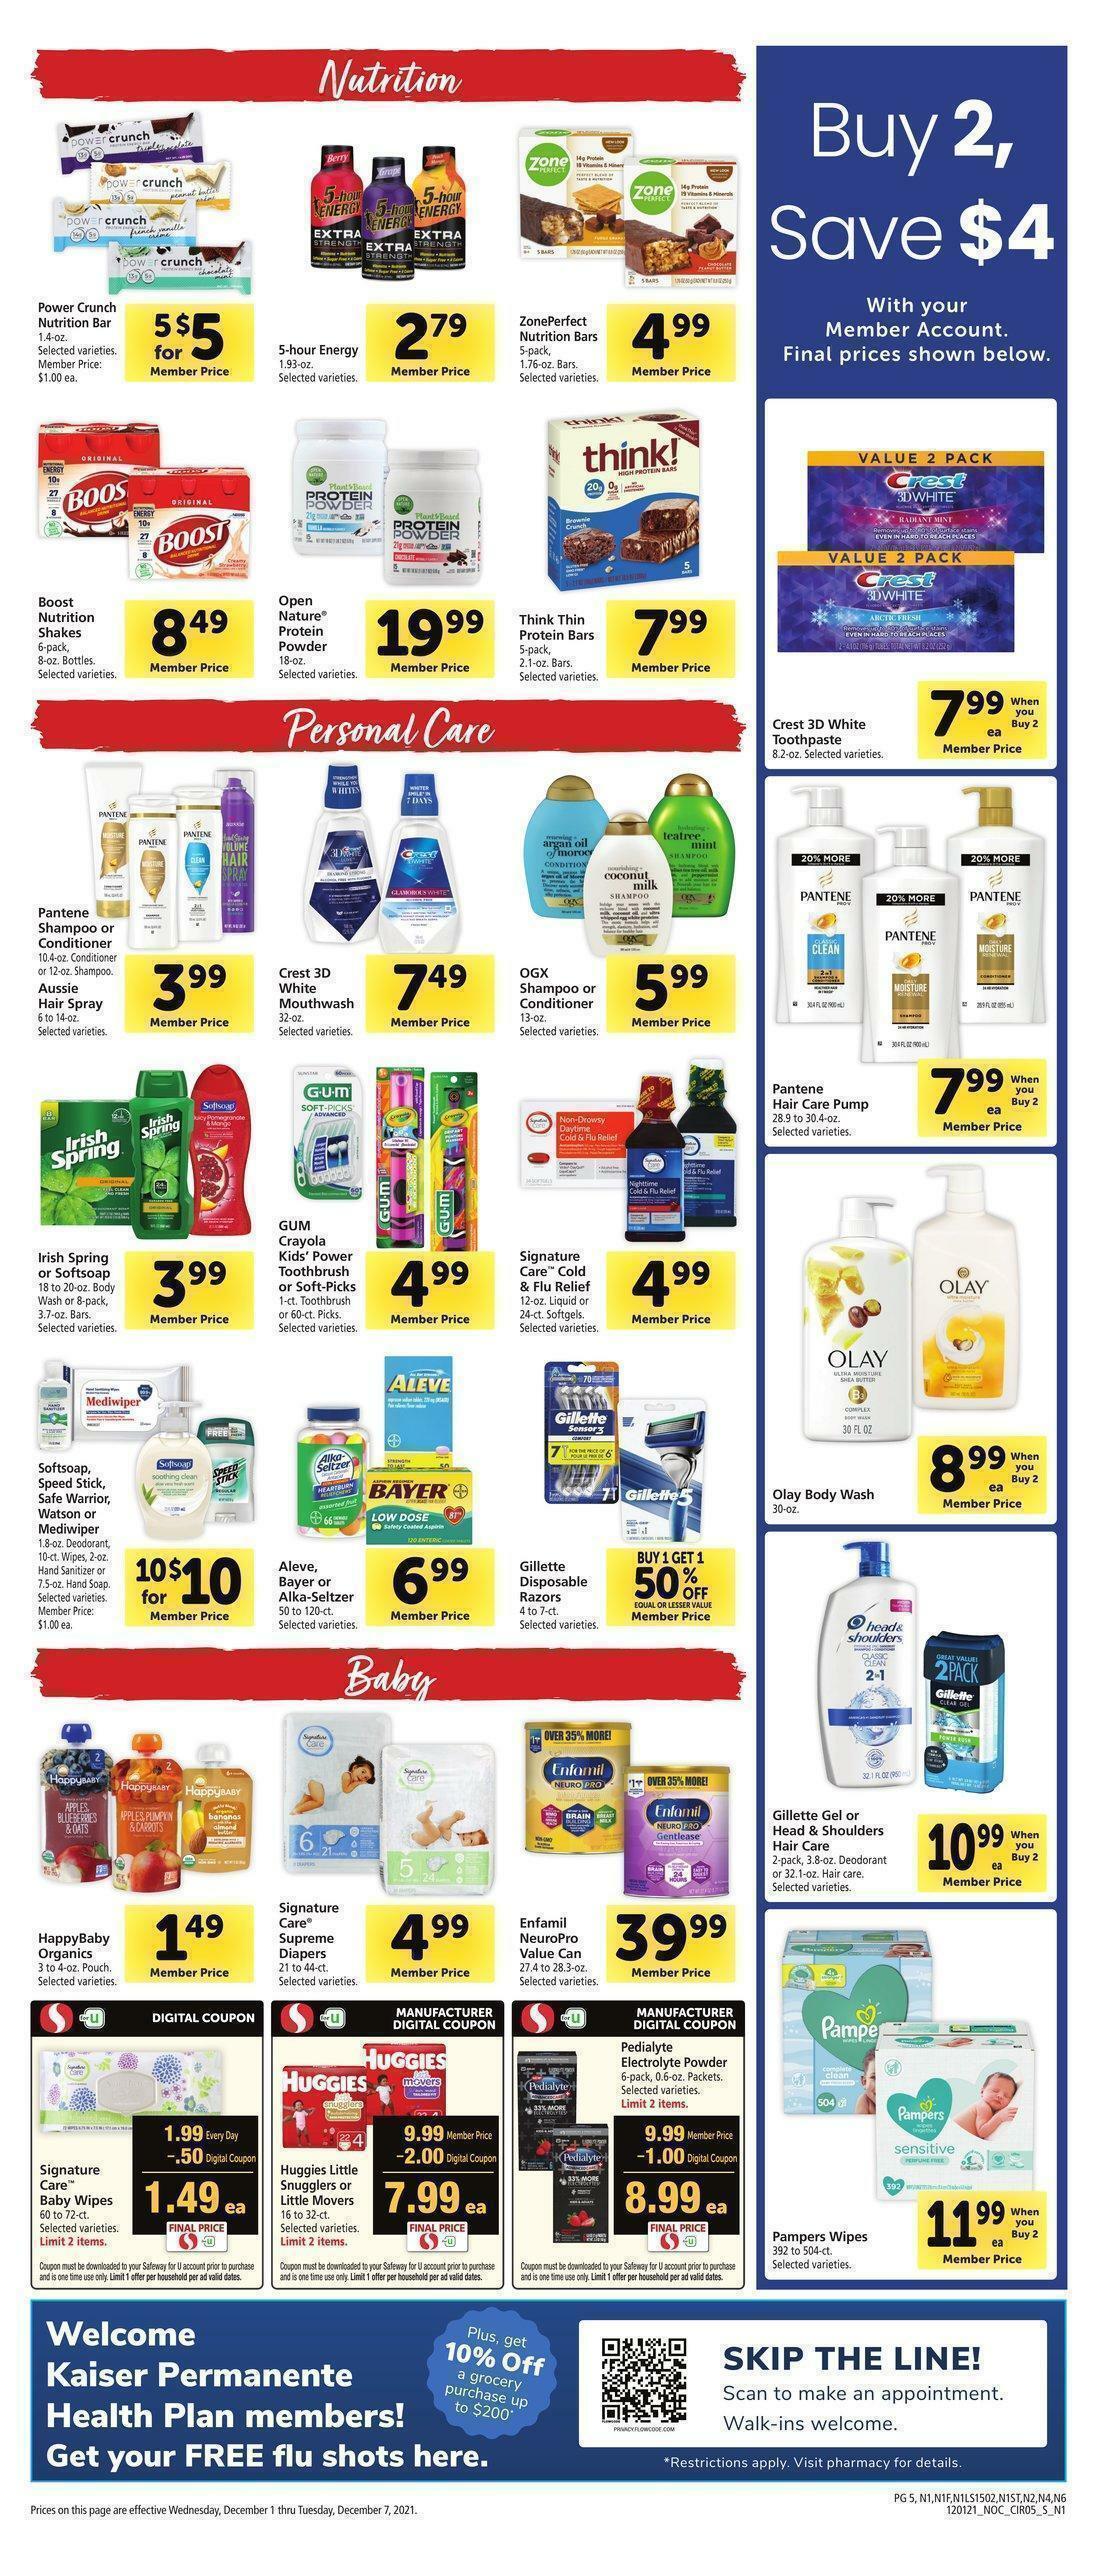 Safeway Weekly Ad from December 1